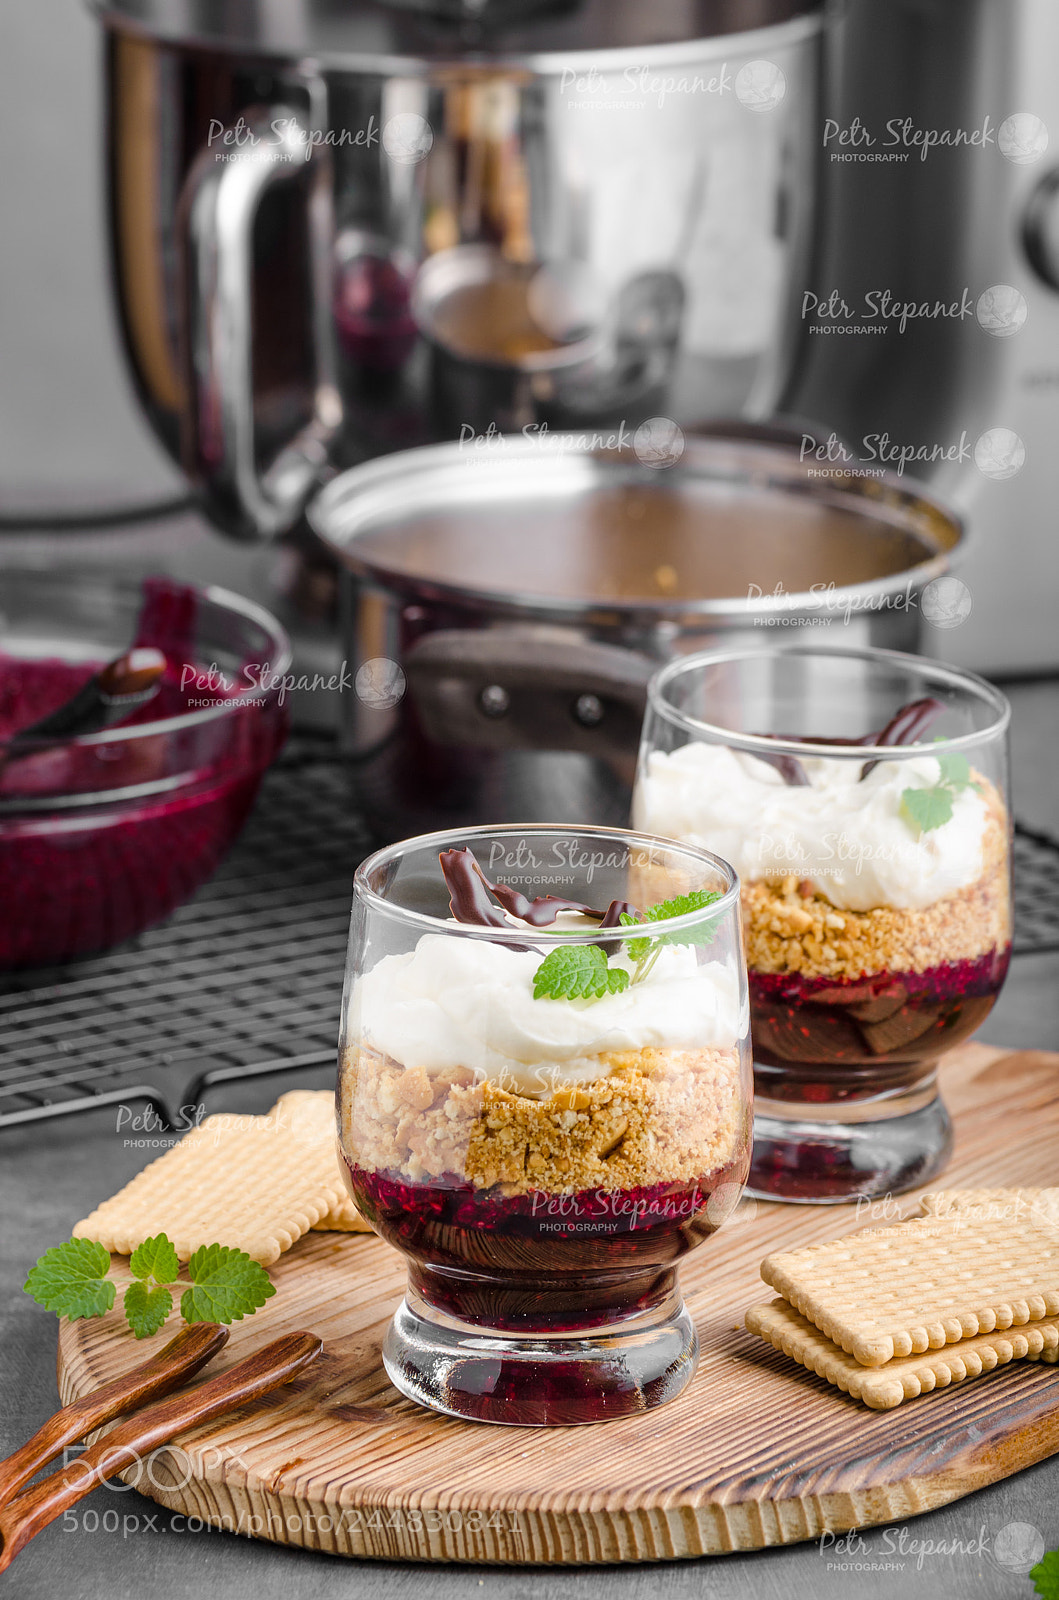 Nikon D7000 sample photo. Cheesecake in glass photography